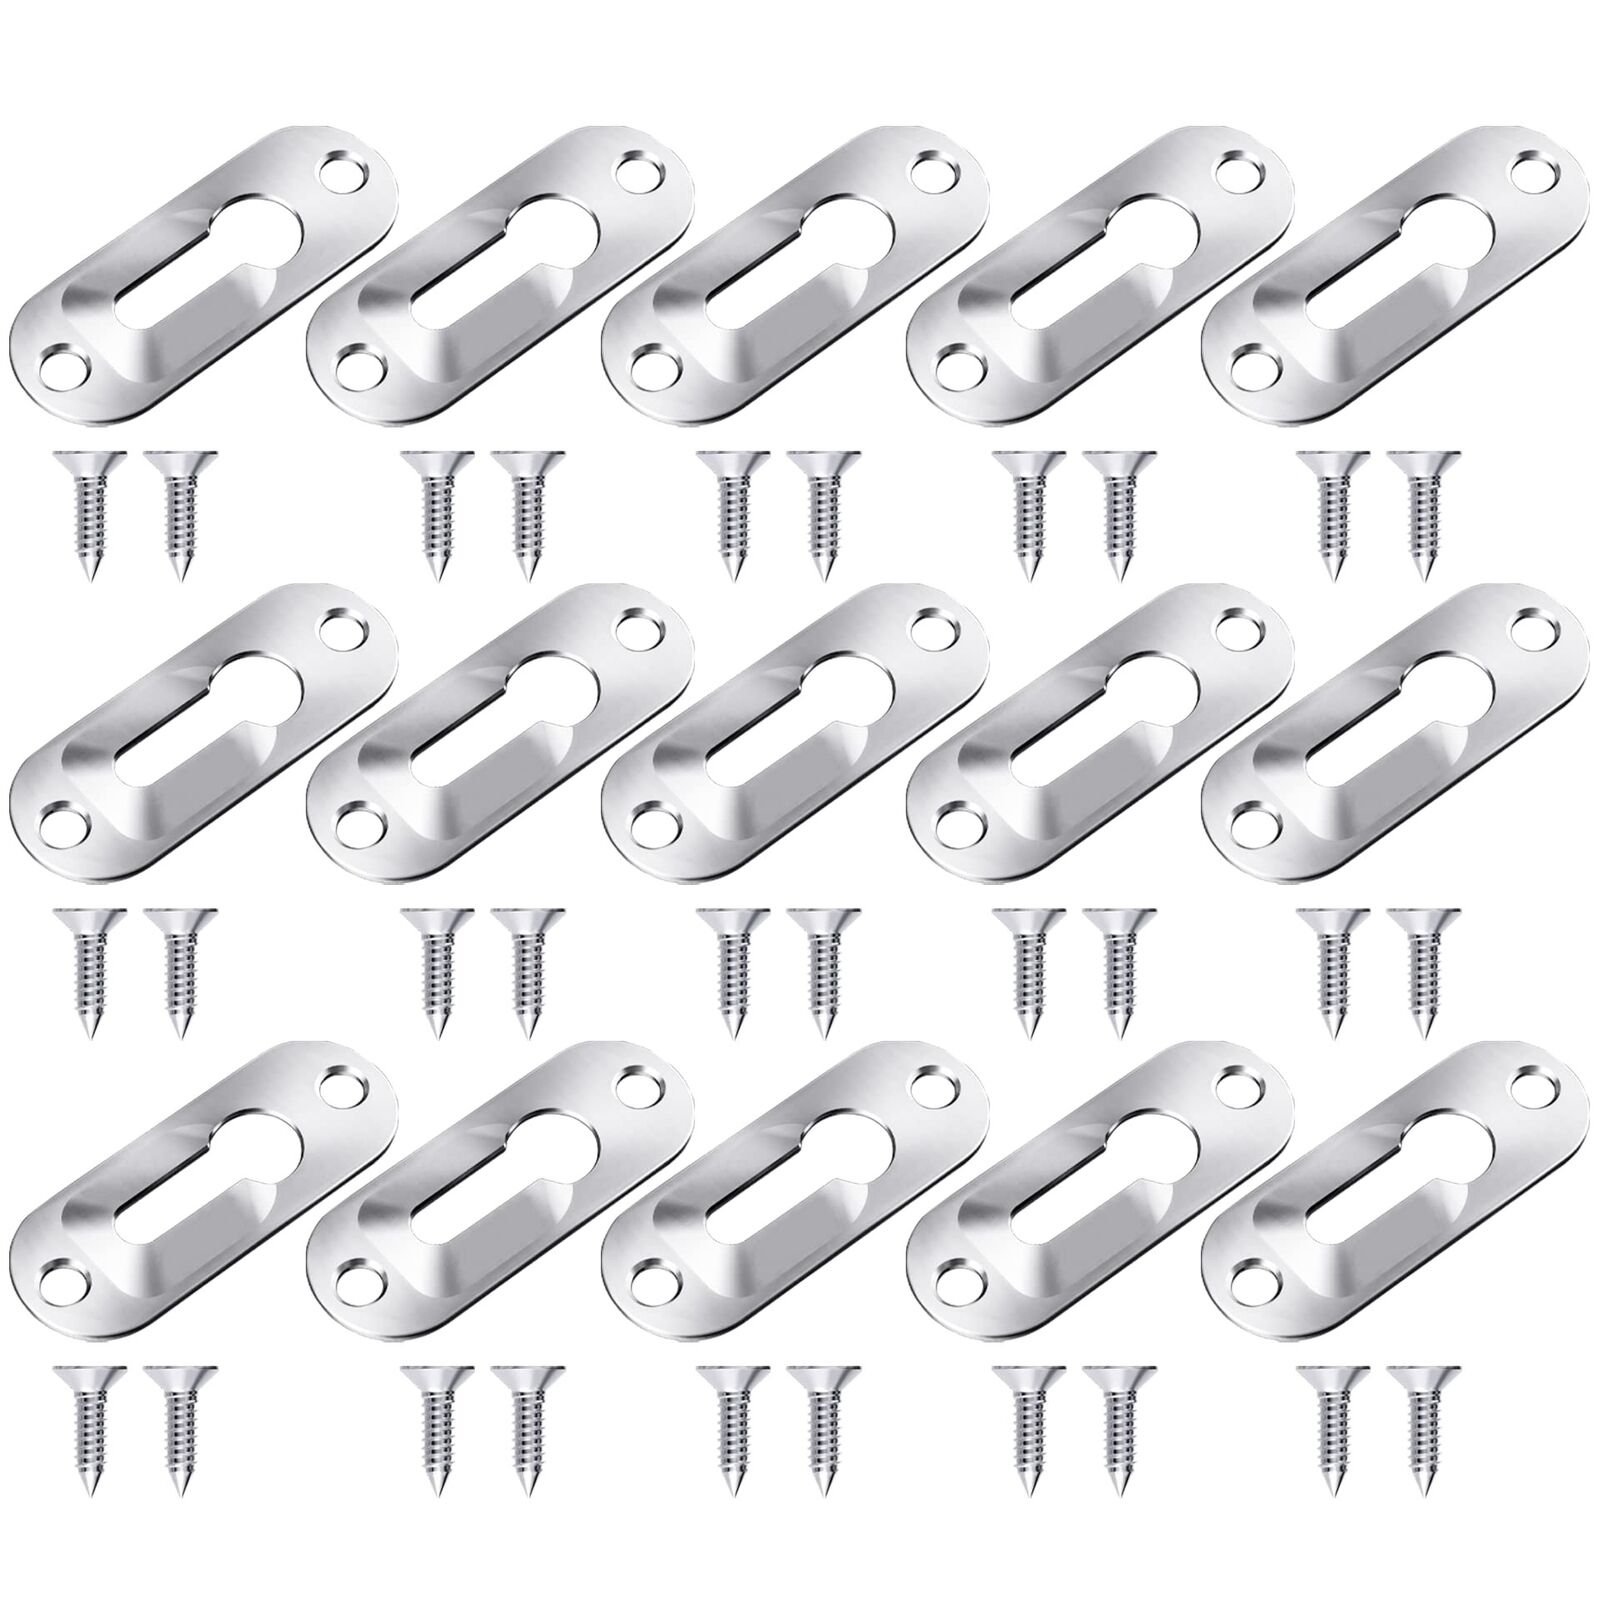 30 Pieces Single Keyhole Hangers Metal Hanging Brackets for Mirror Picture Fr...